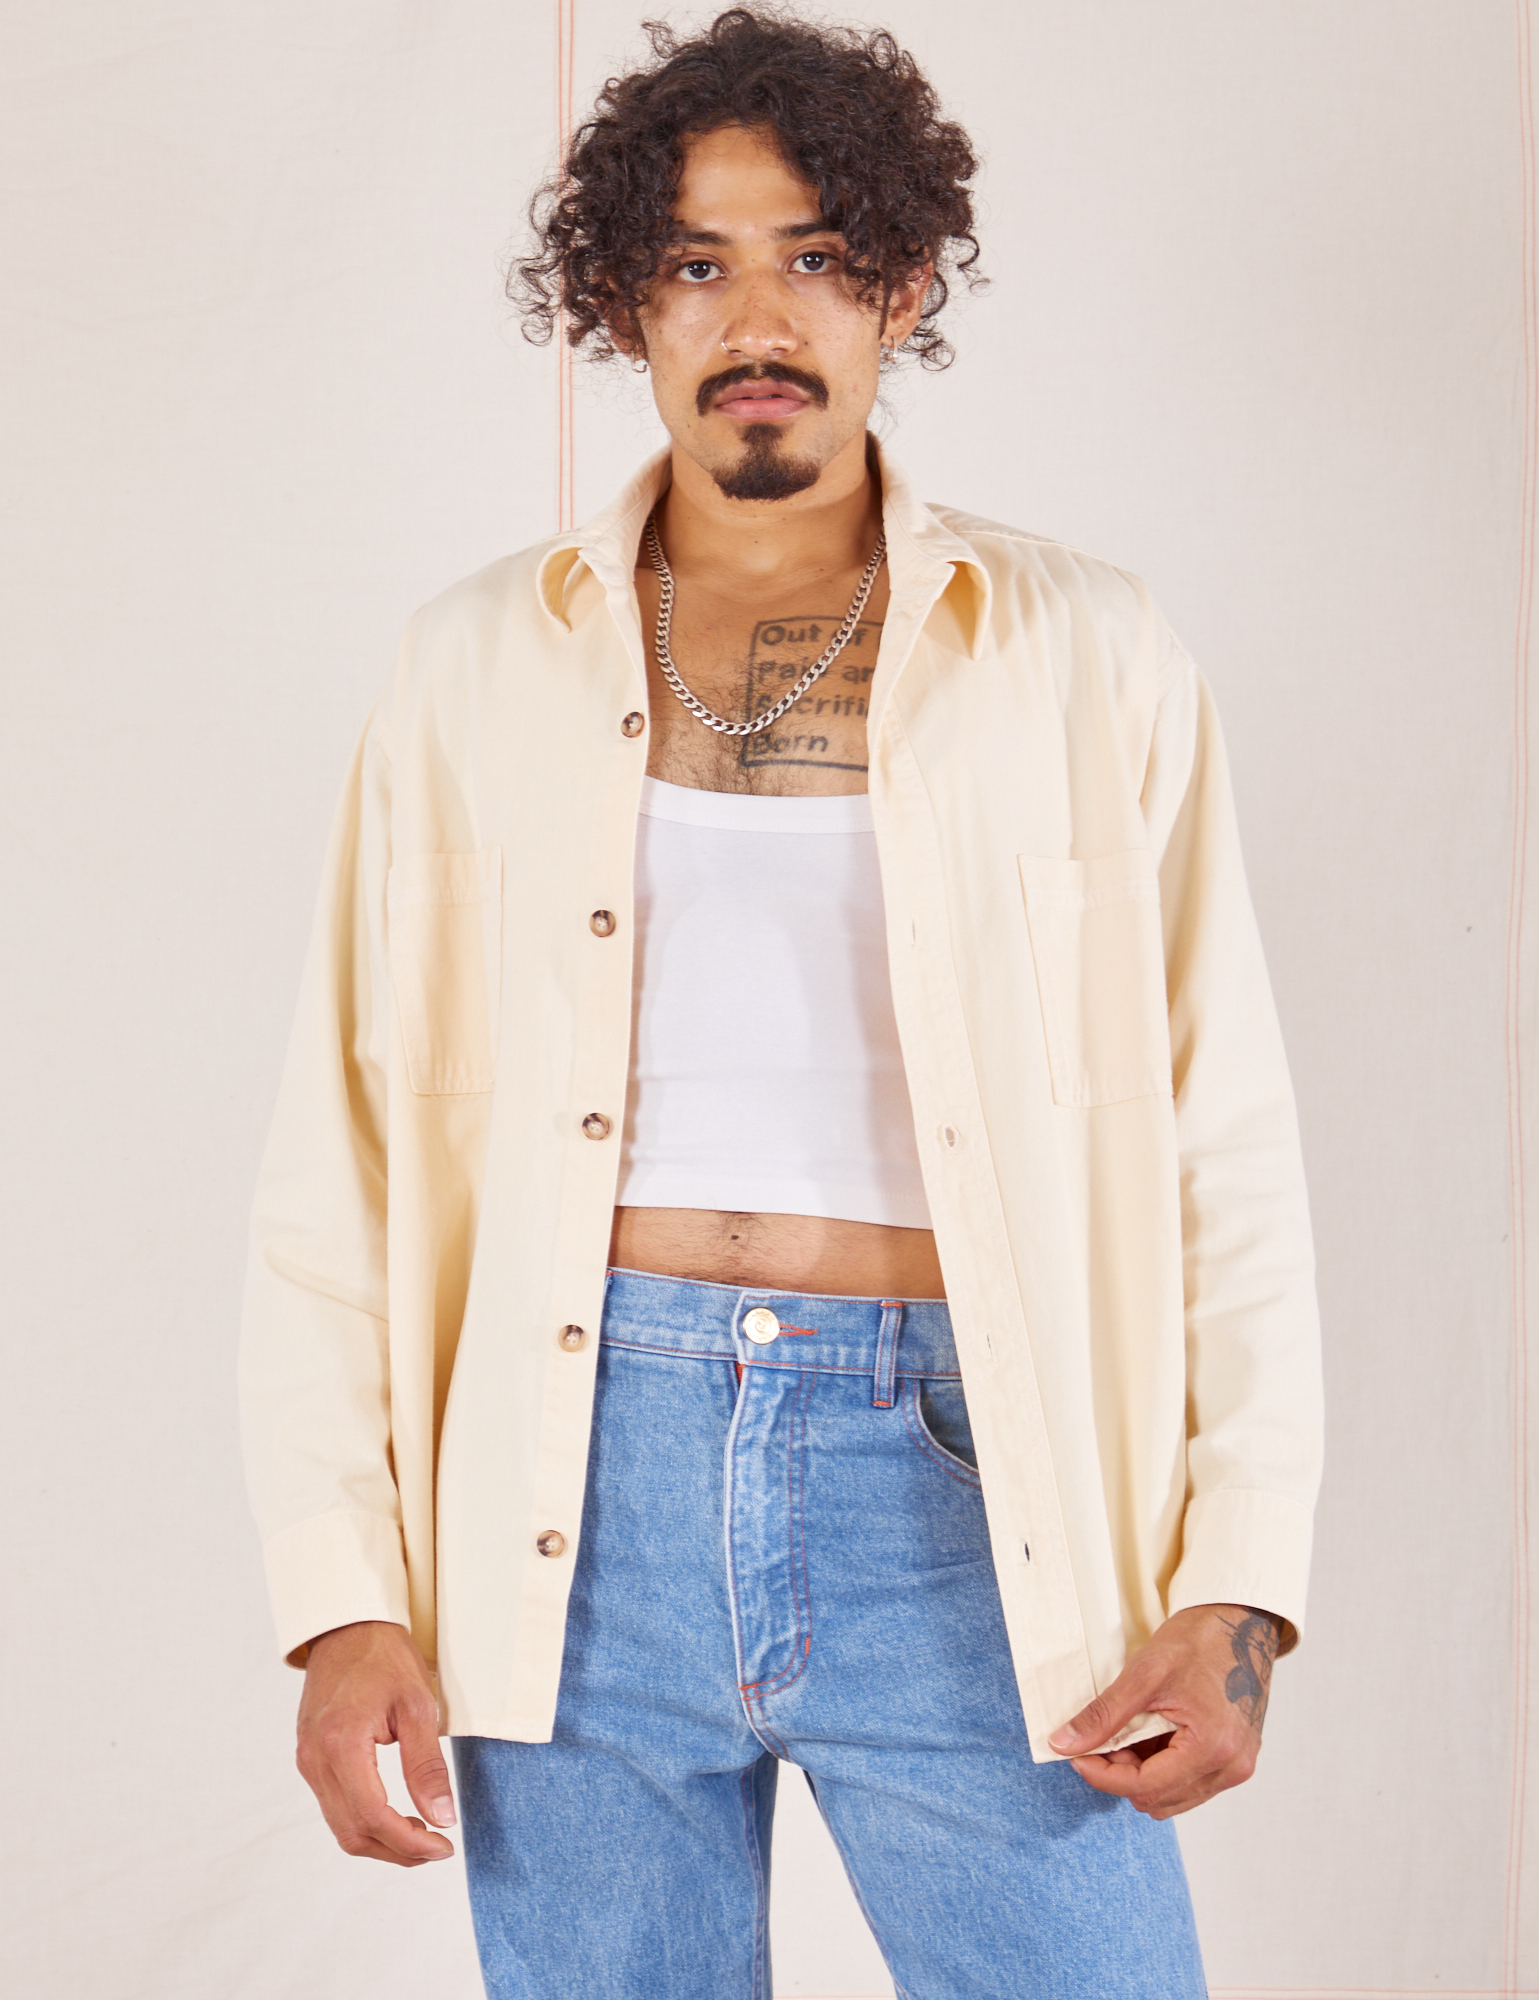 Jesse is wearing Oversize Overshirt in Vintage Tee Off-White